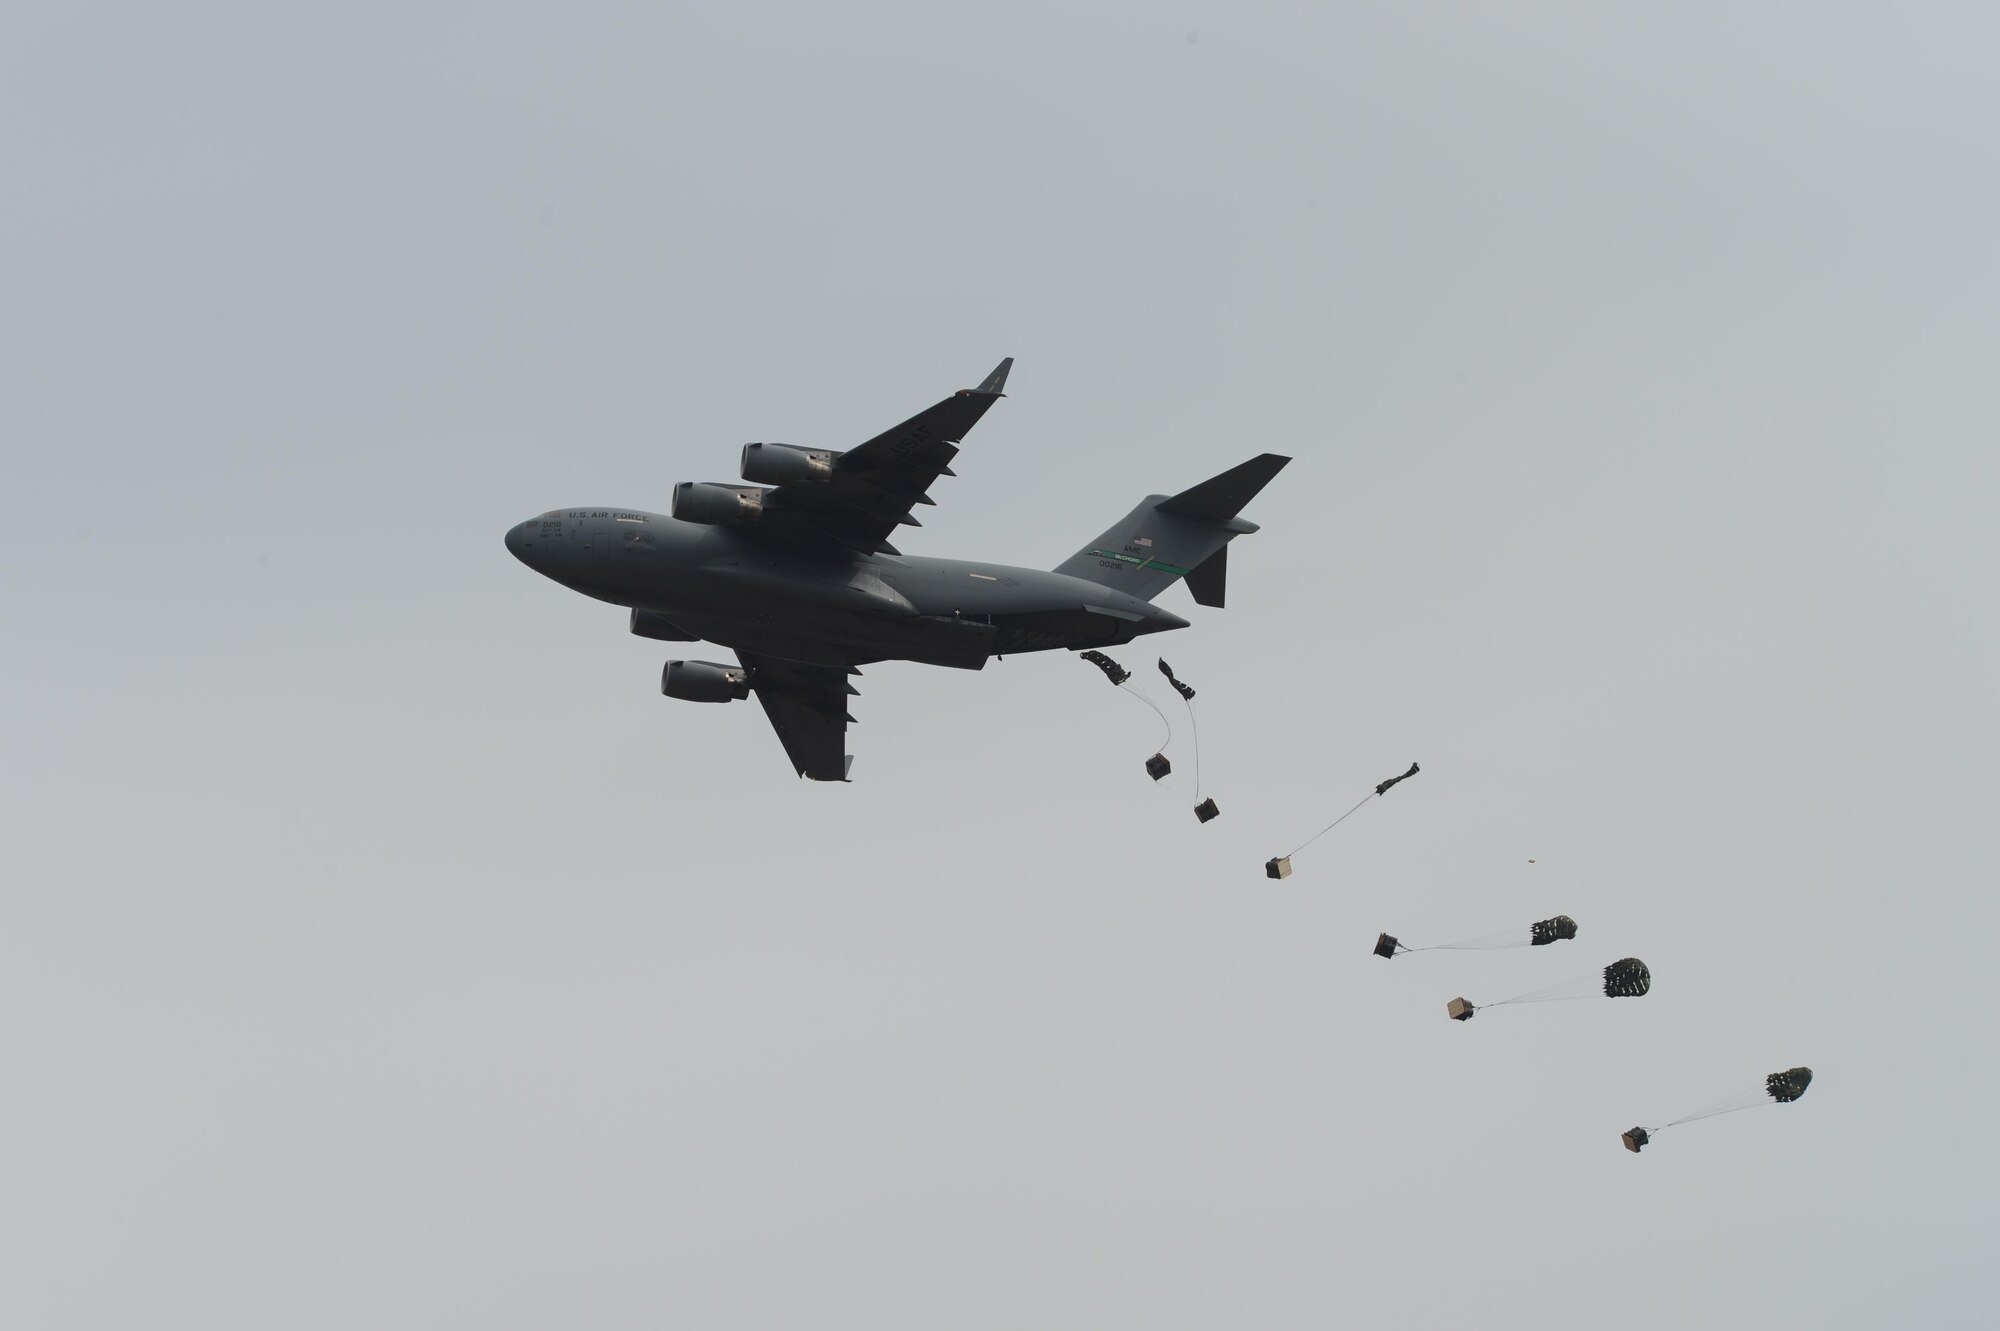 A C-17 Globemaster III performs an air drop Aug. 8, 2016, during the JBLM Airshow and Warrior Expo at Joint Base Lewis-McChord, Wash. The C-17 performed in the airshow to demonstrate the aircraft’s airdrop and maneuverability capabilities. (U.S. Air Force photo/Senior Airman Divine Cox) 